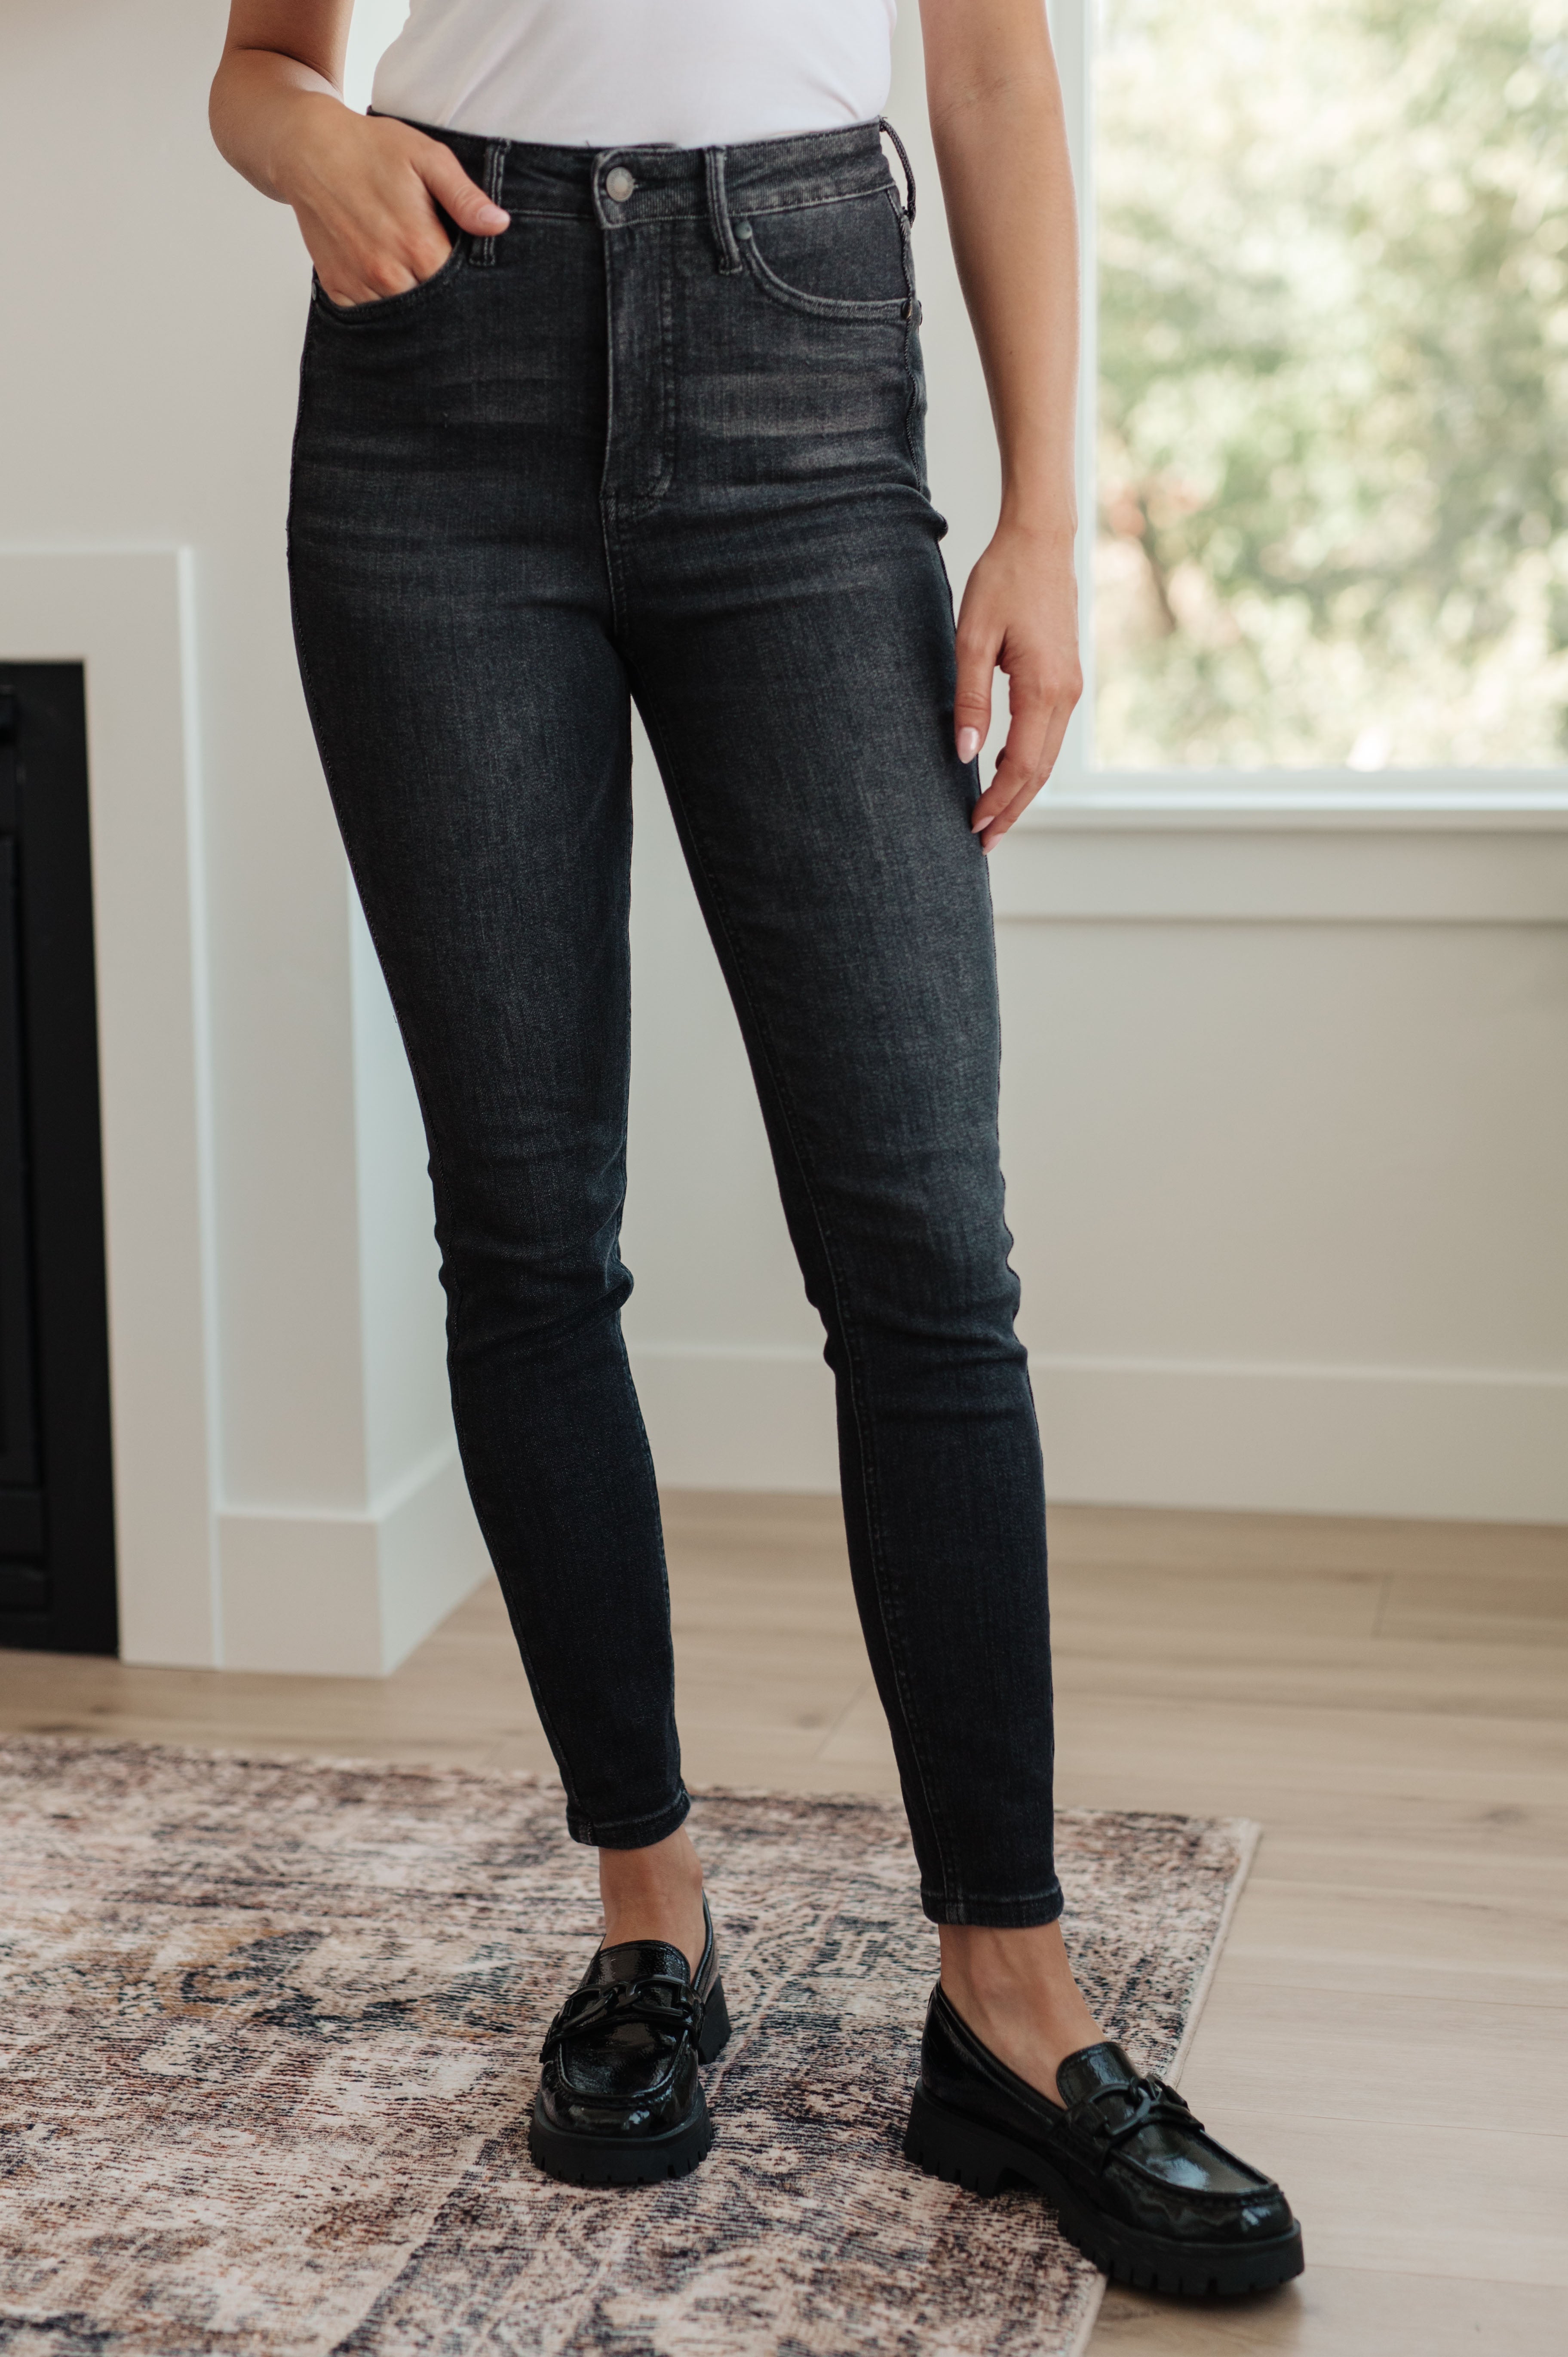 Judy Blue Octavia High Rise Tummy Control Top Skinny Jeans in Washed Black Ave Shops 11-13-23